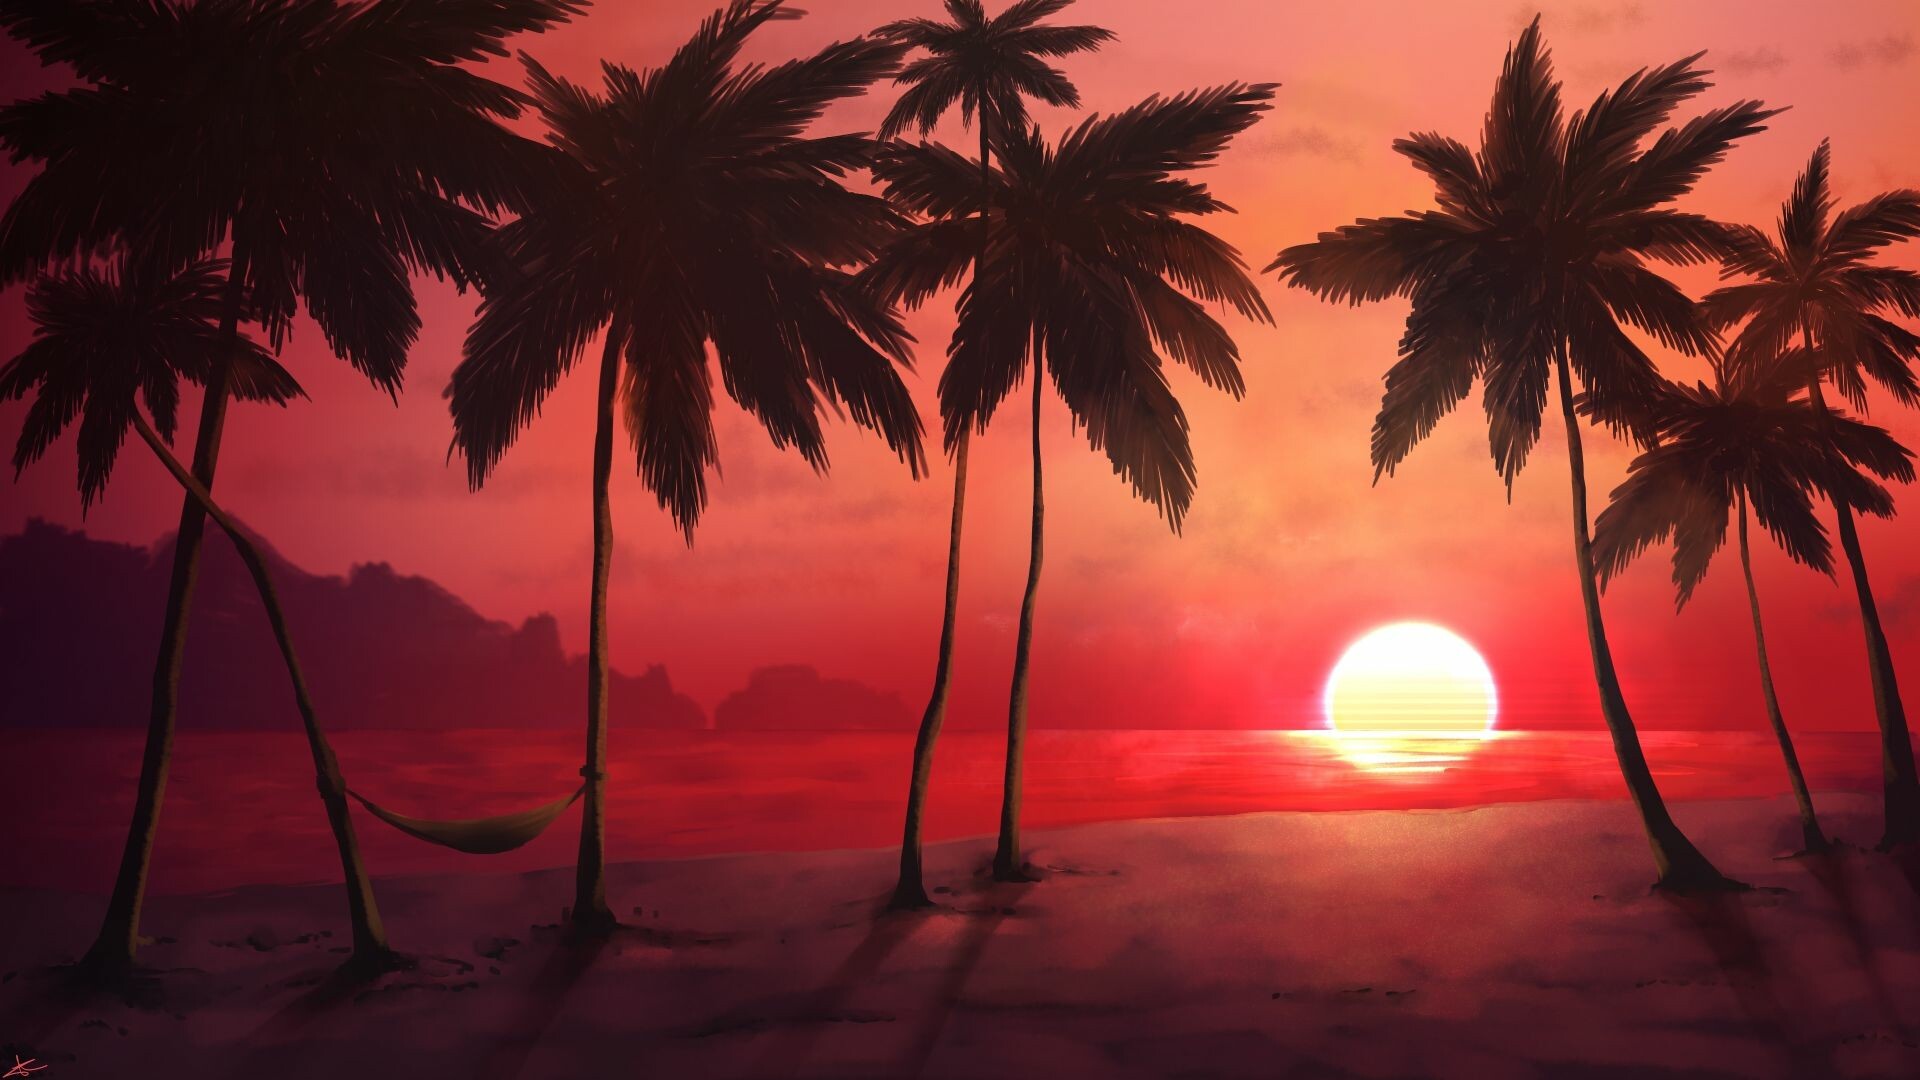 Tropical beach sunset, Relaxing palm trees, Breathtaking scenery, Tranquil paradise, 1920x1080 Full HD Desktop